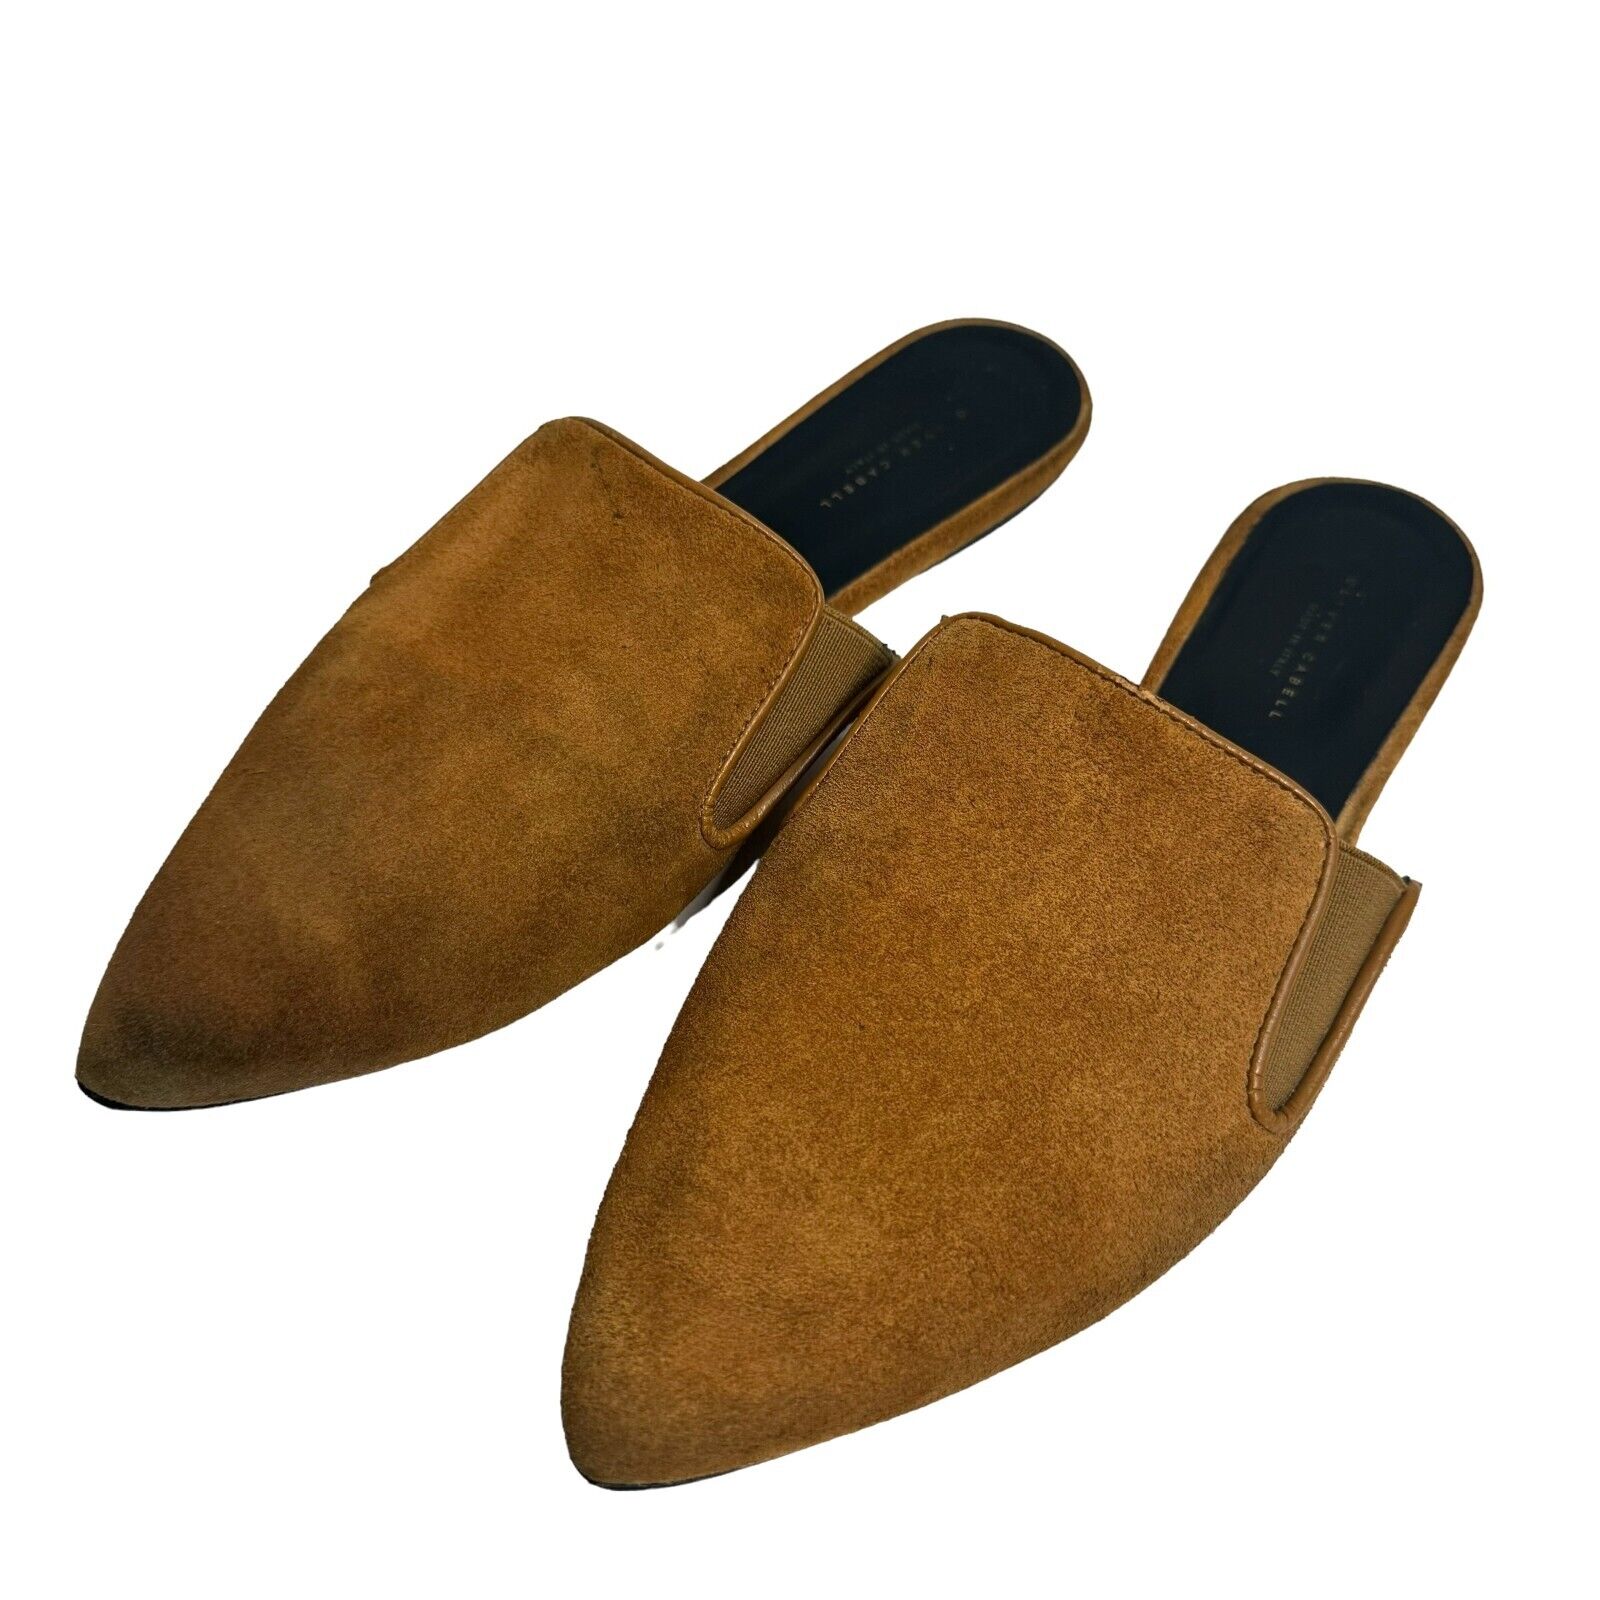 Oliver Cabell Suede Dream Mule Flats in Caramel 40 Size 9